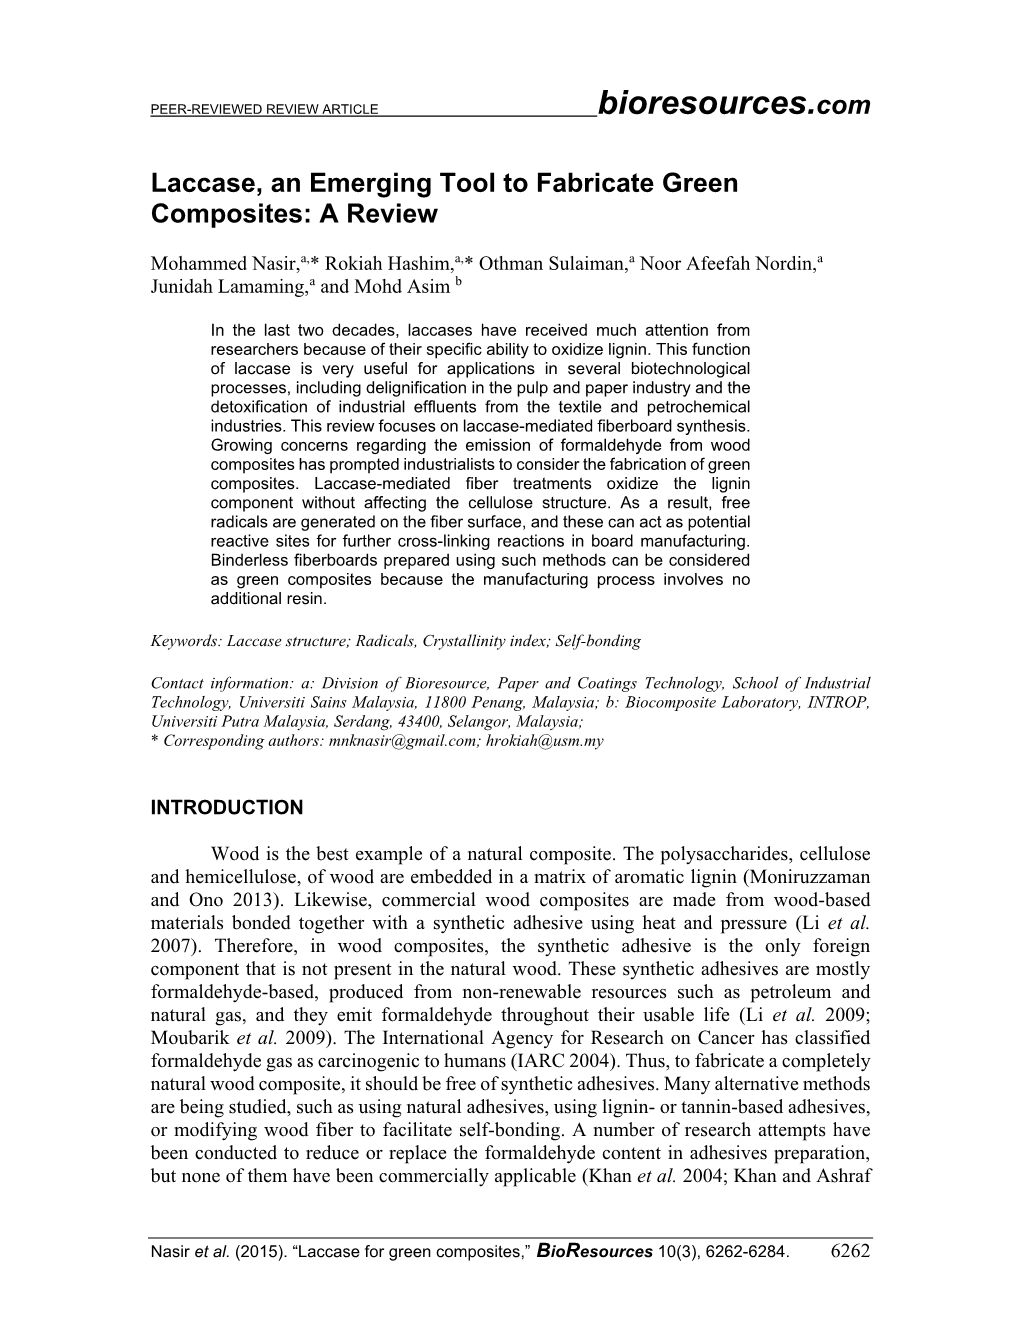 Laccase, an Emerging Tool to Fabricate Green Composites: a Review